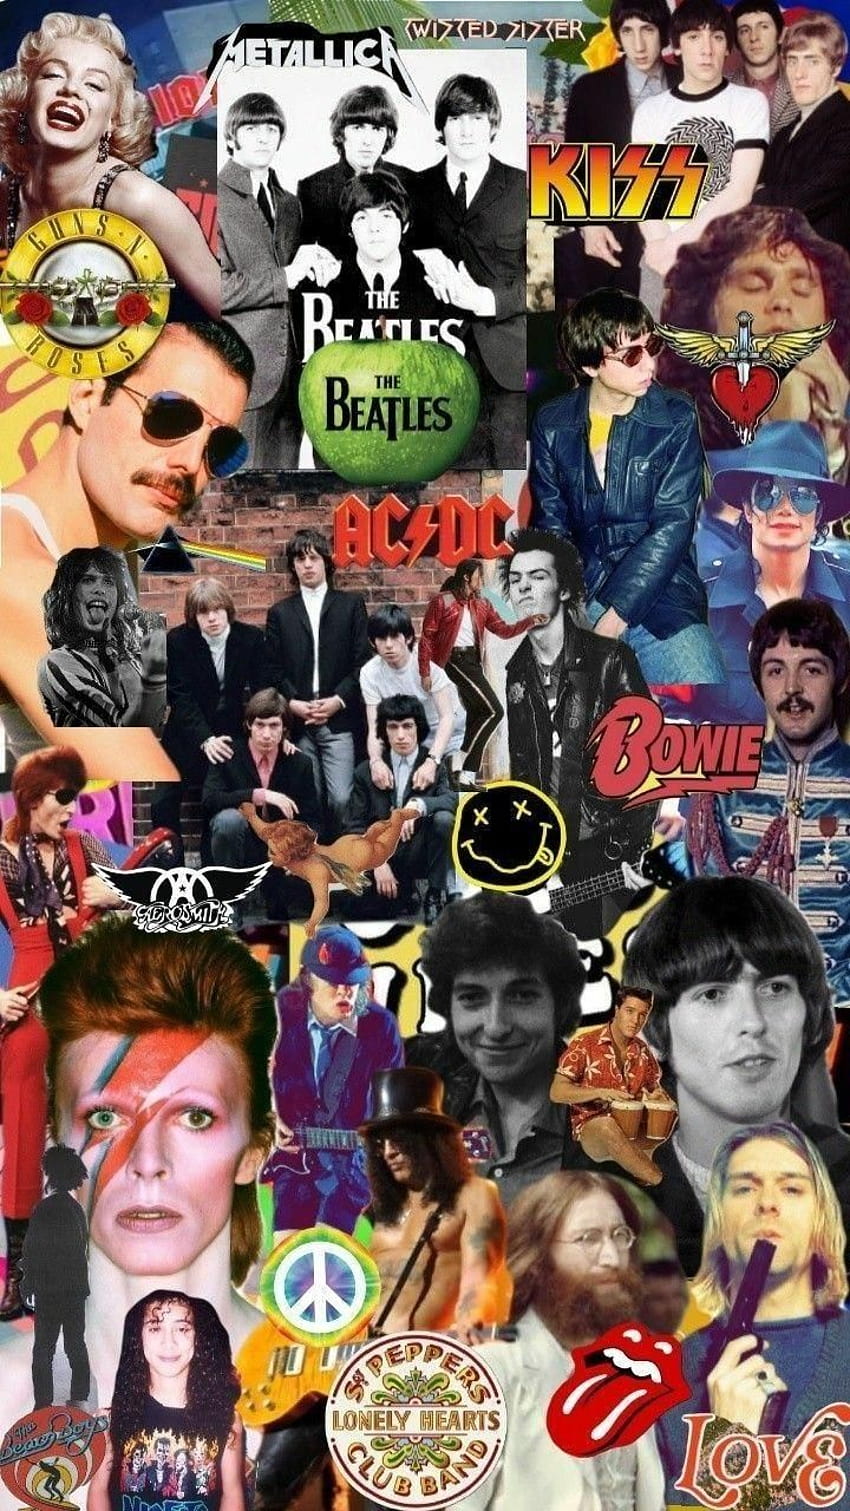 The beatles and other rock stars - Rock, 80s